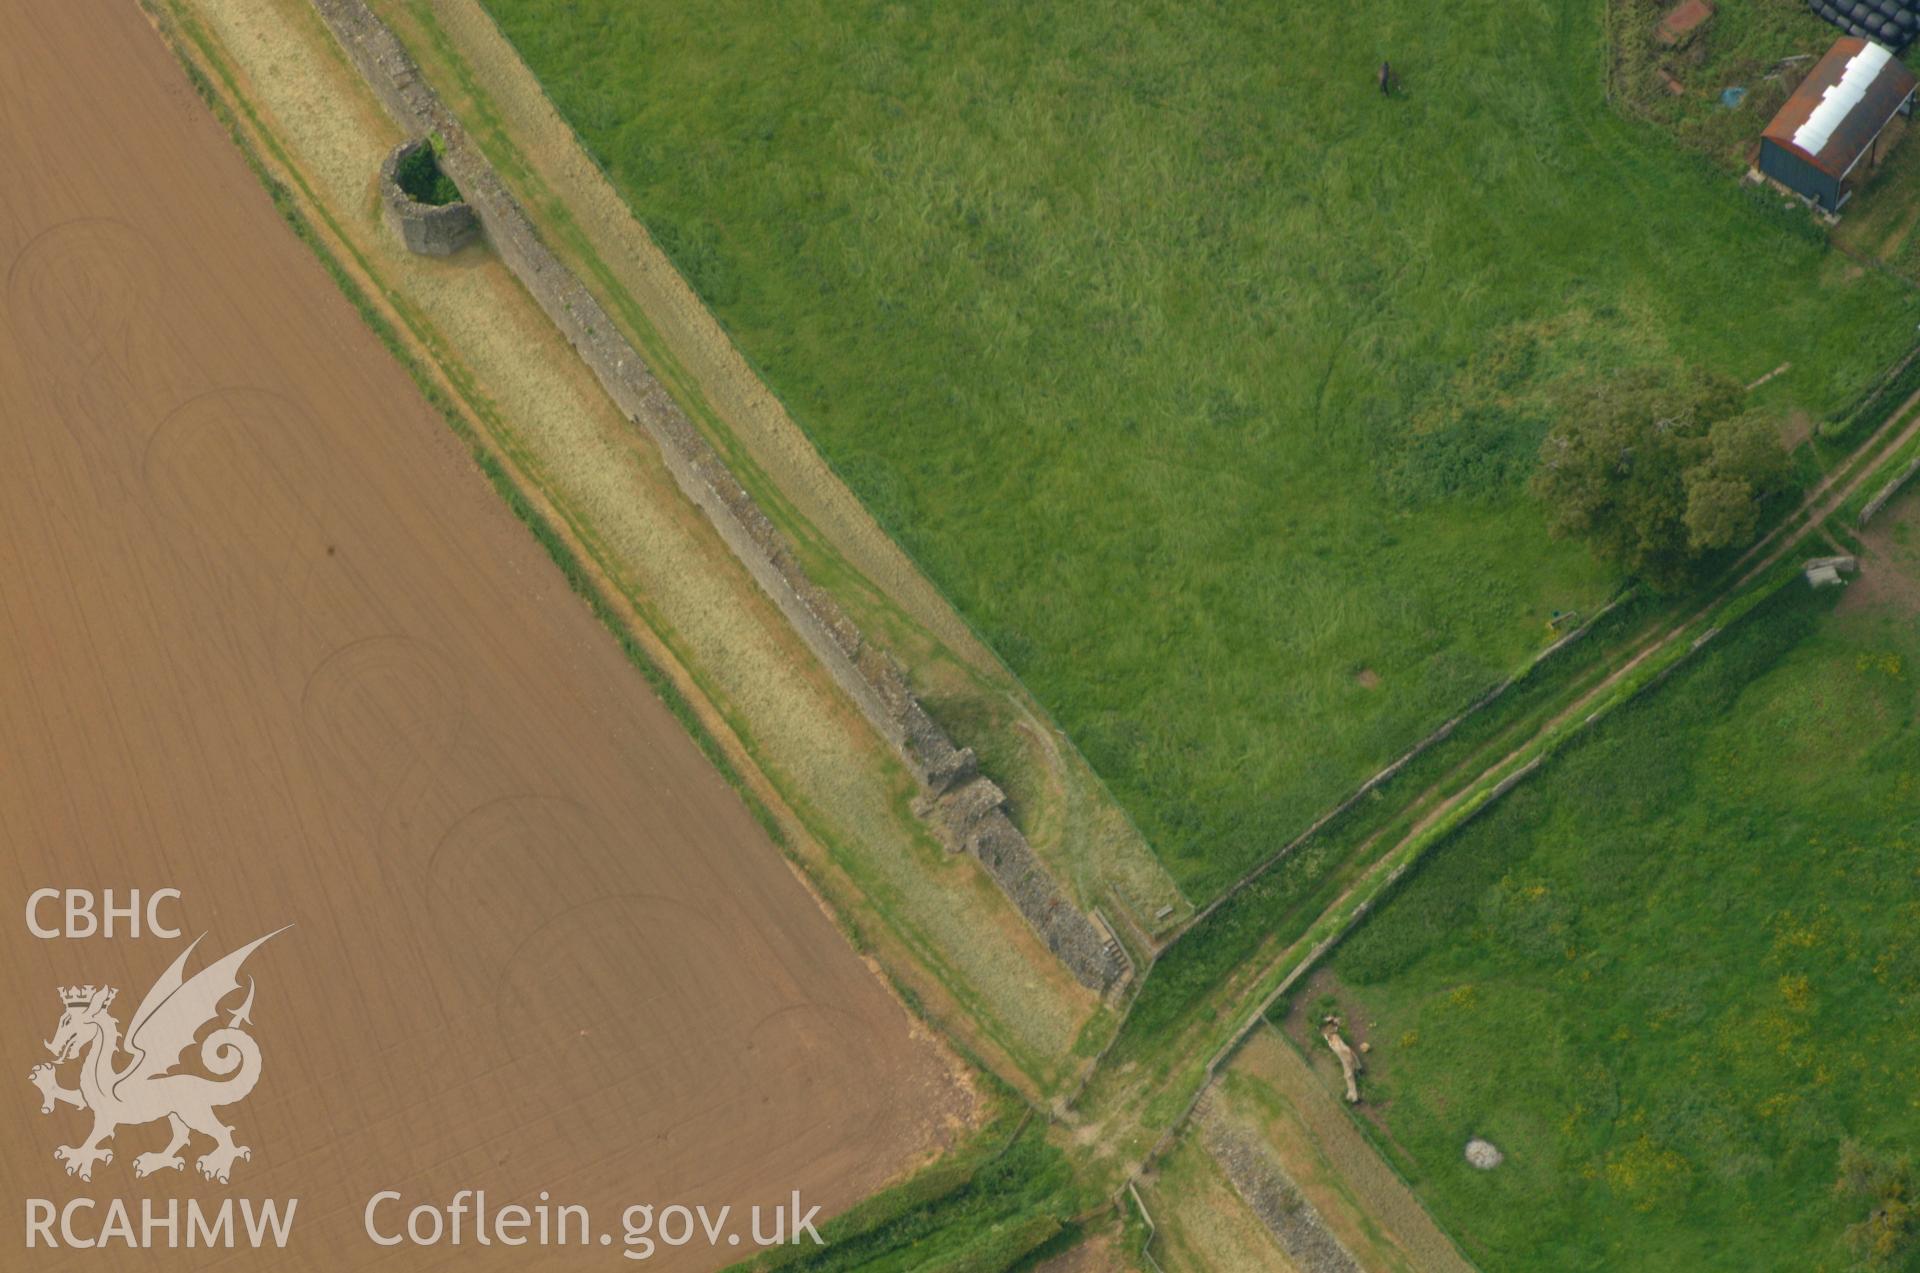 RCAHMW colour oblique aerial photograph of Caerwent Roman Town (Venta Silurum) taken on 26/05/2004 by Toby Driver